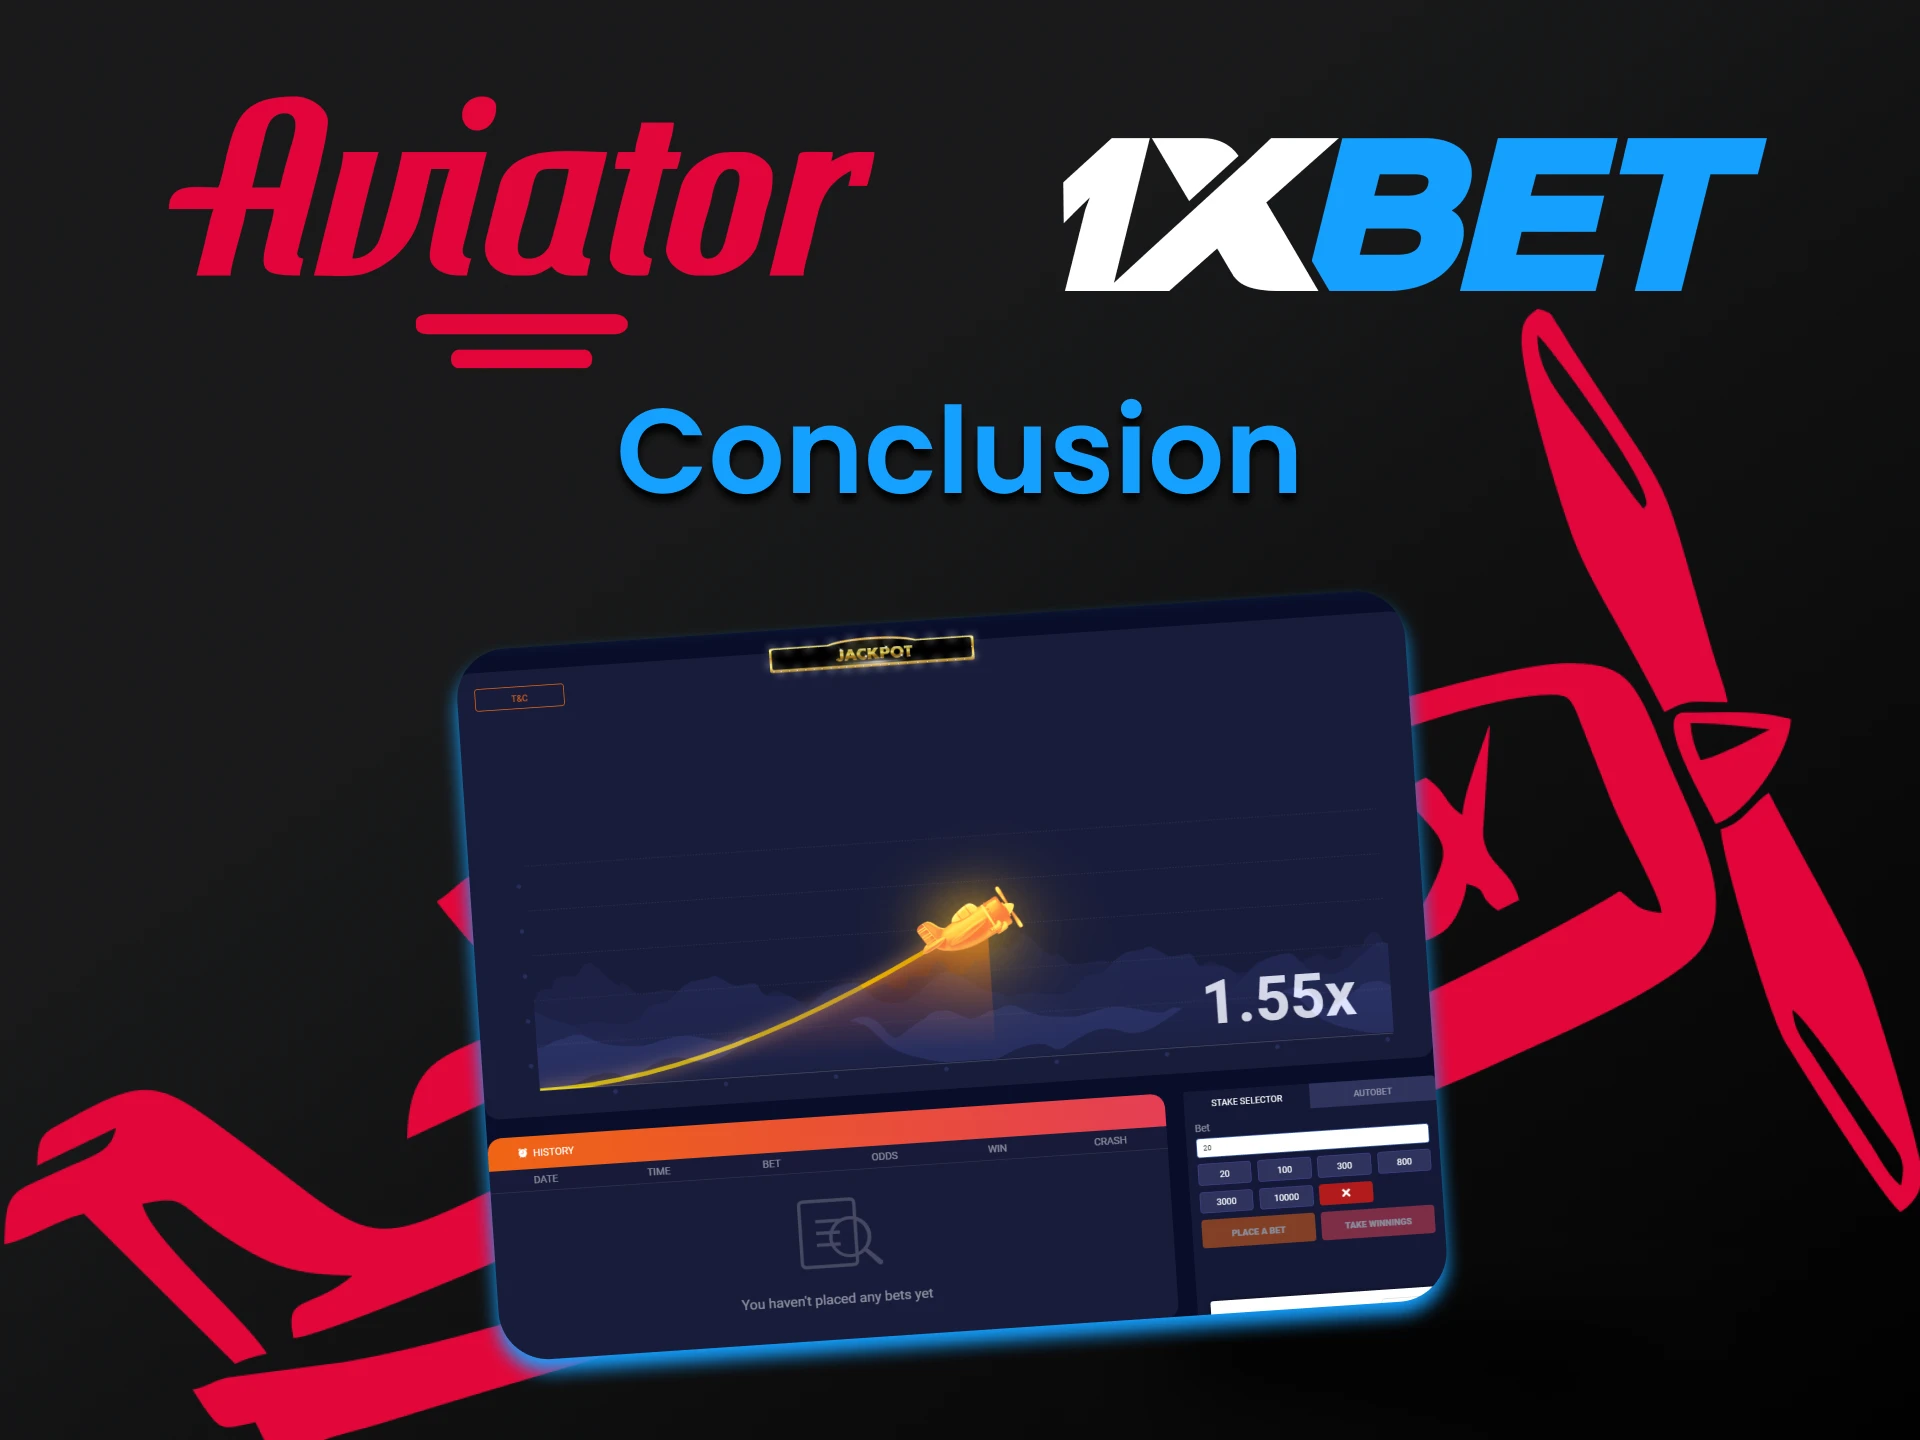 1xbet is the perfect platform to play Aviator.